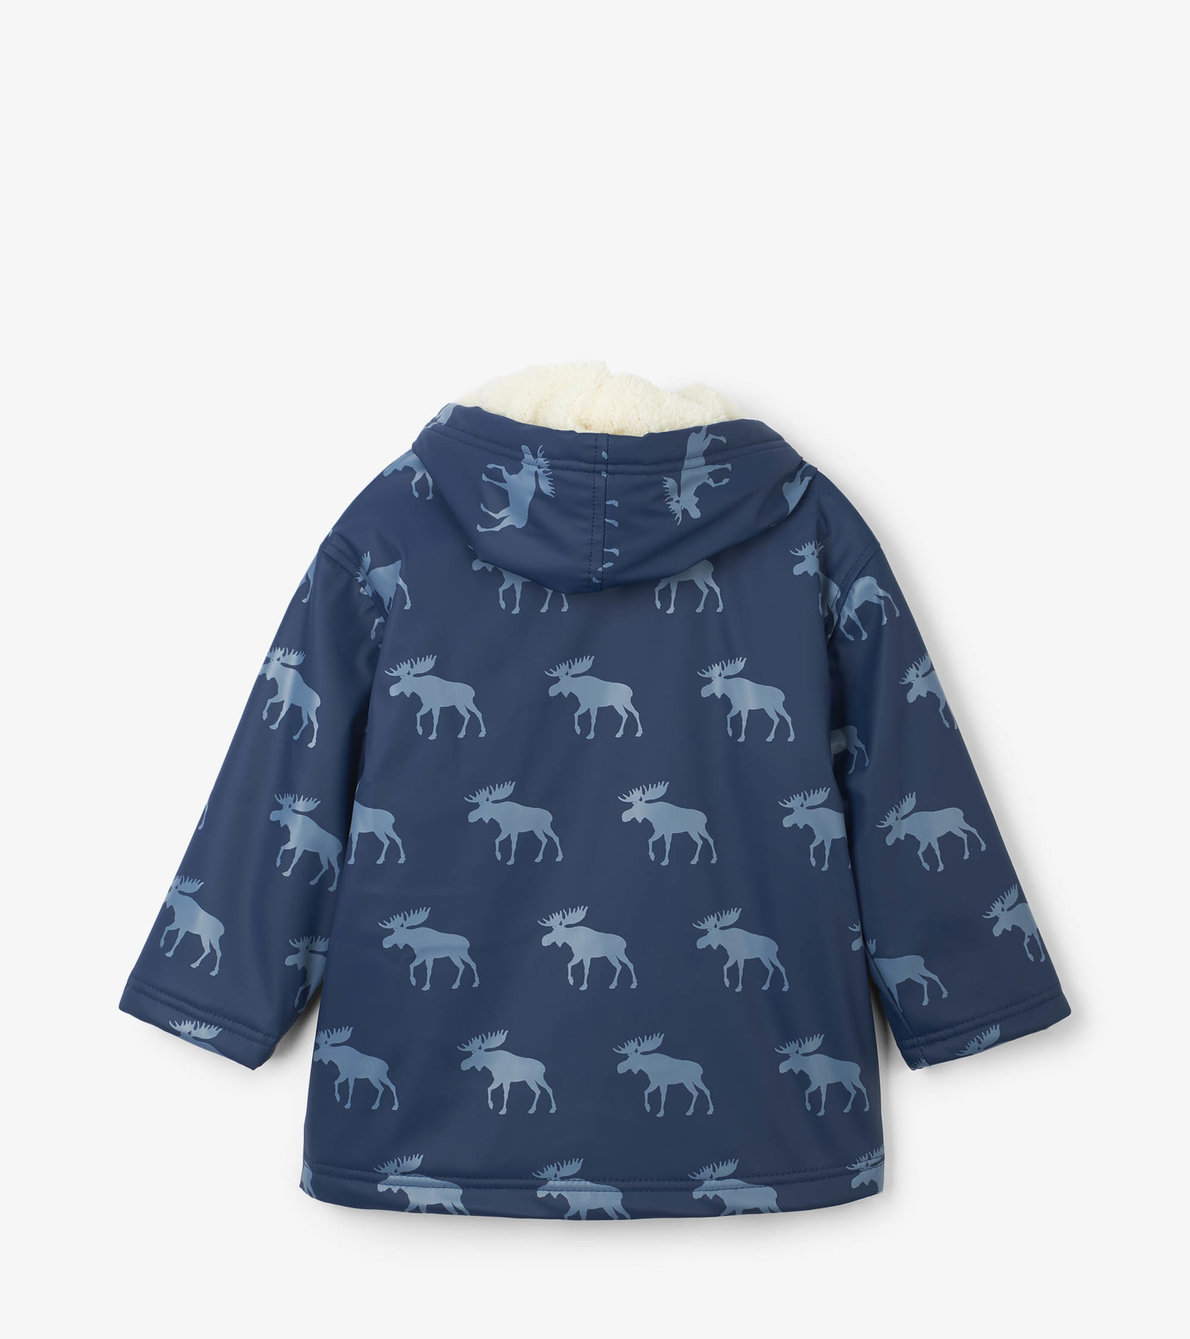 View larger image of Moose Silhouettes Sherpa Lined Splash Jacket